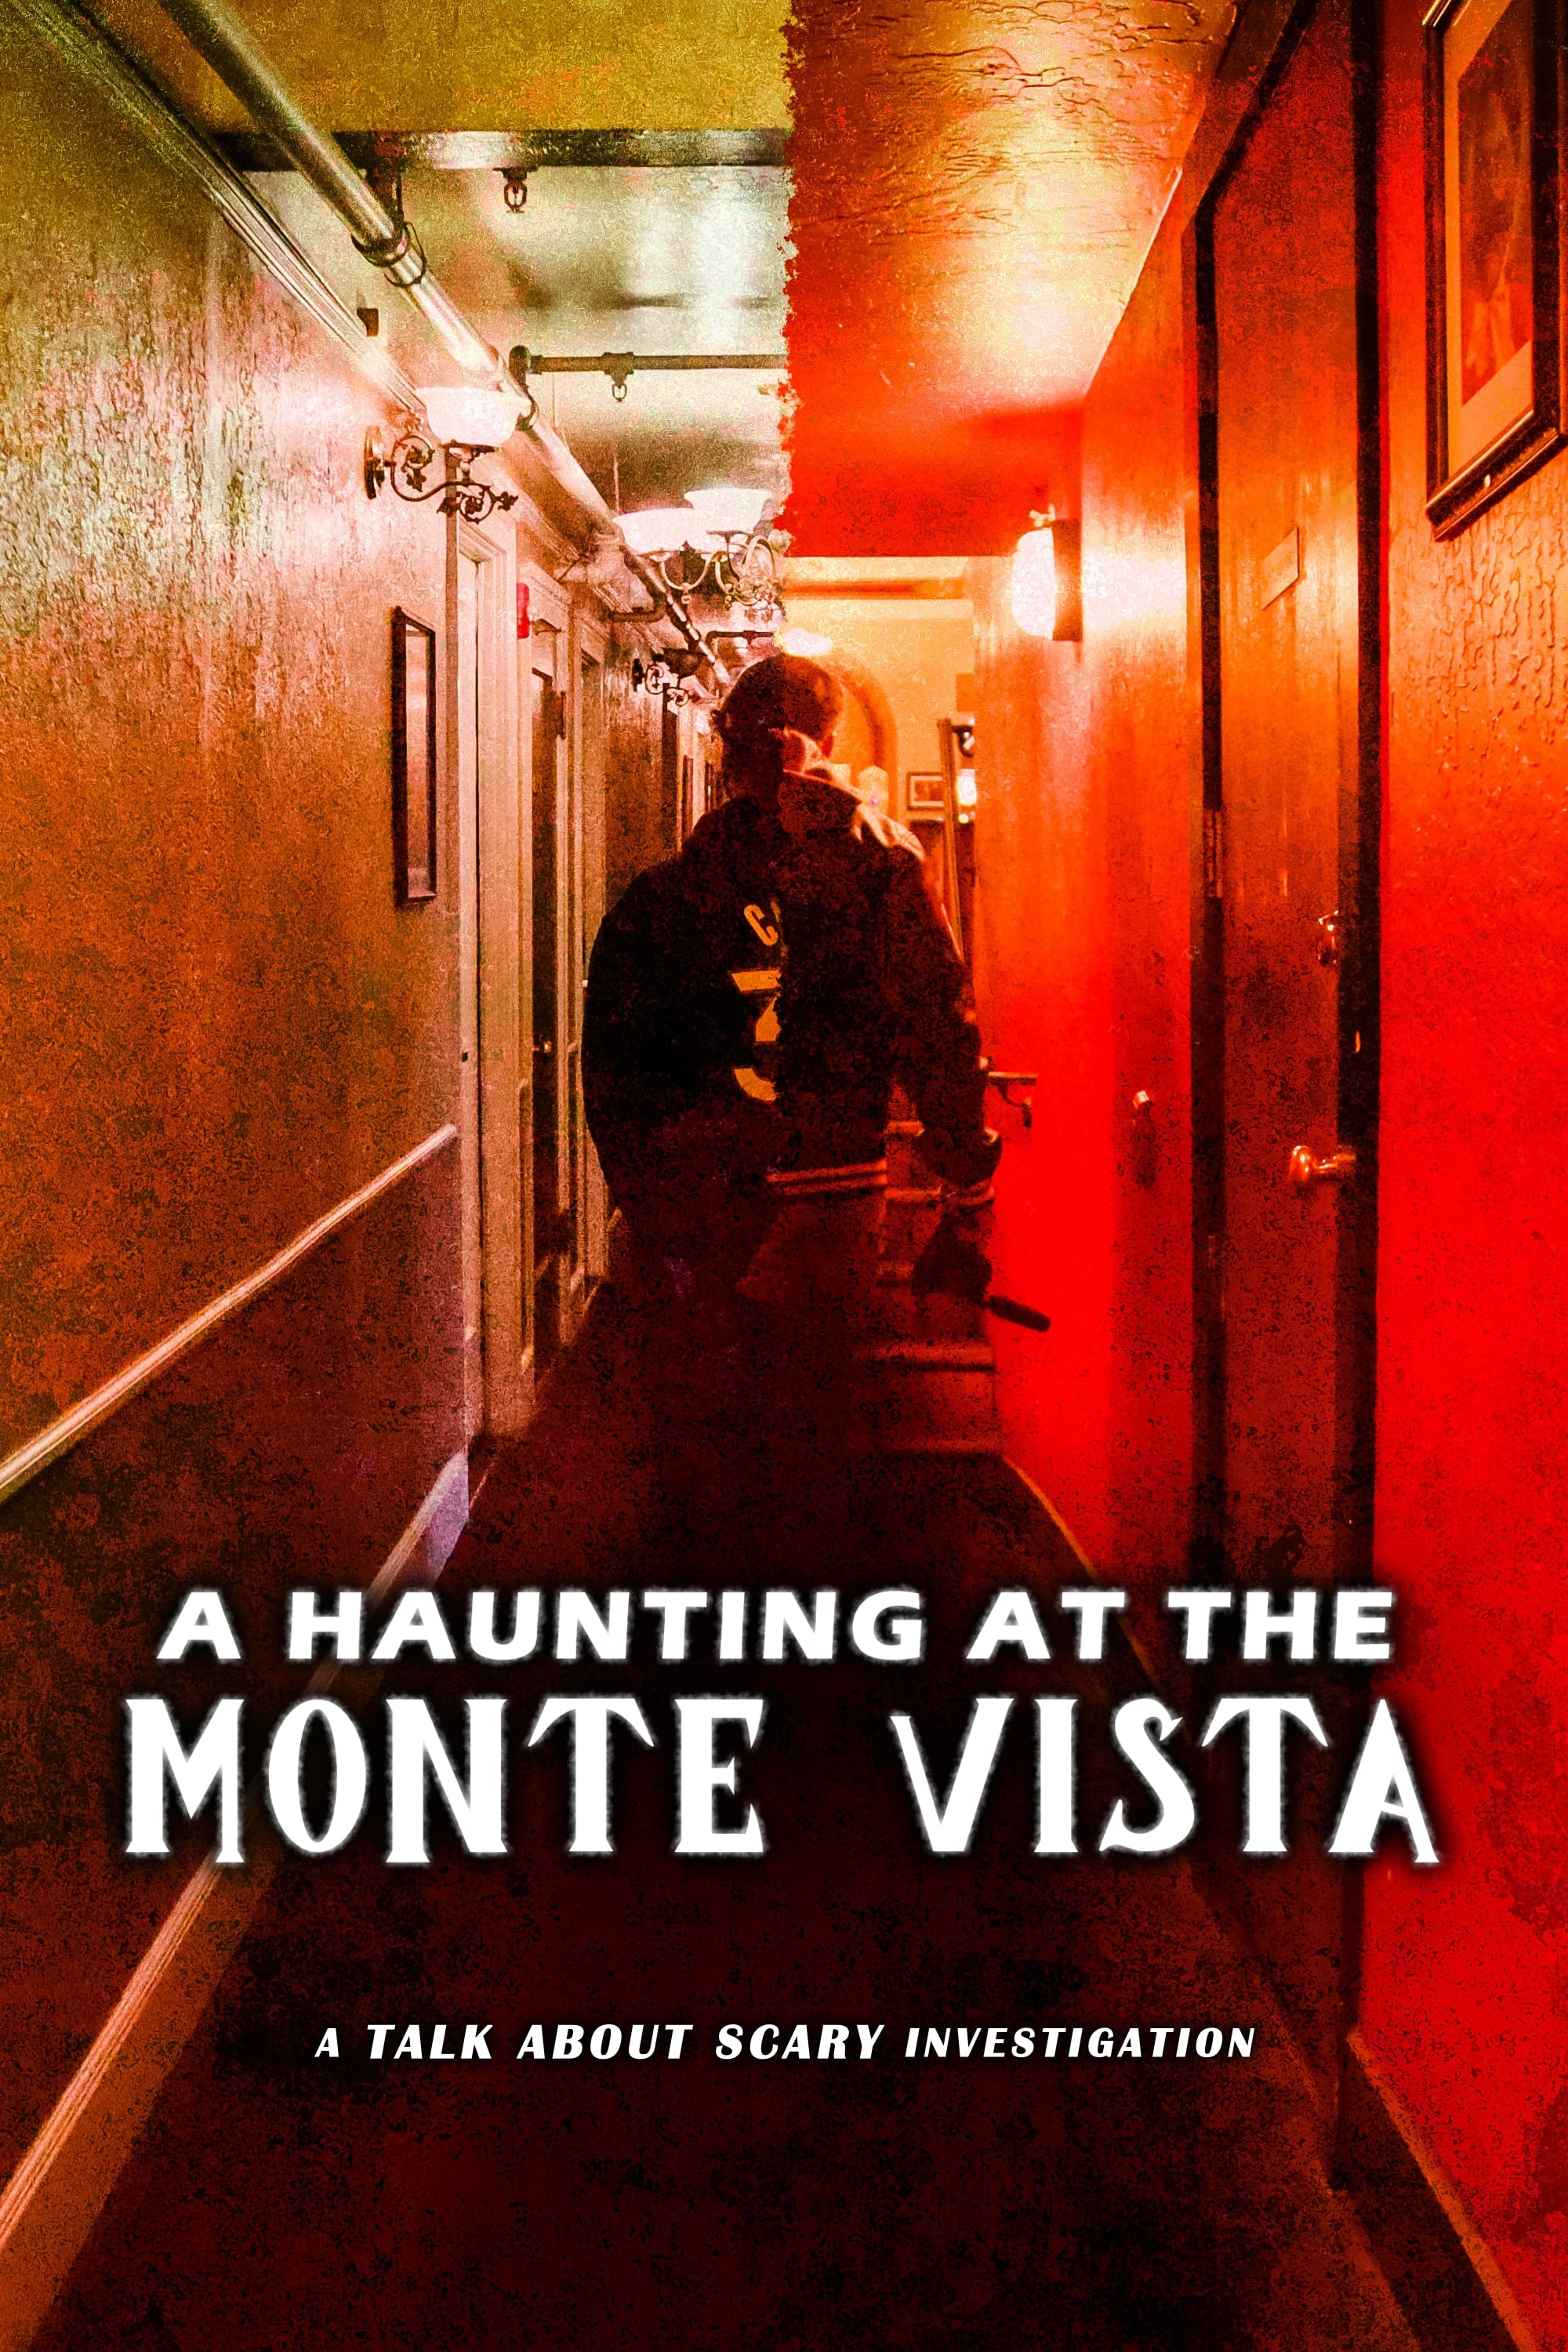 A Haunting At The Monte Vista